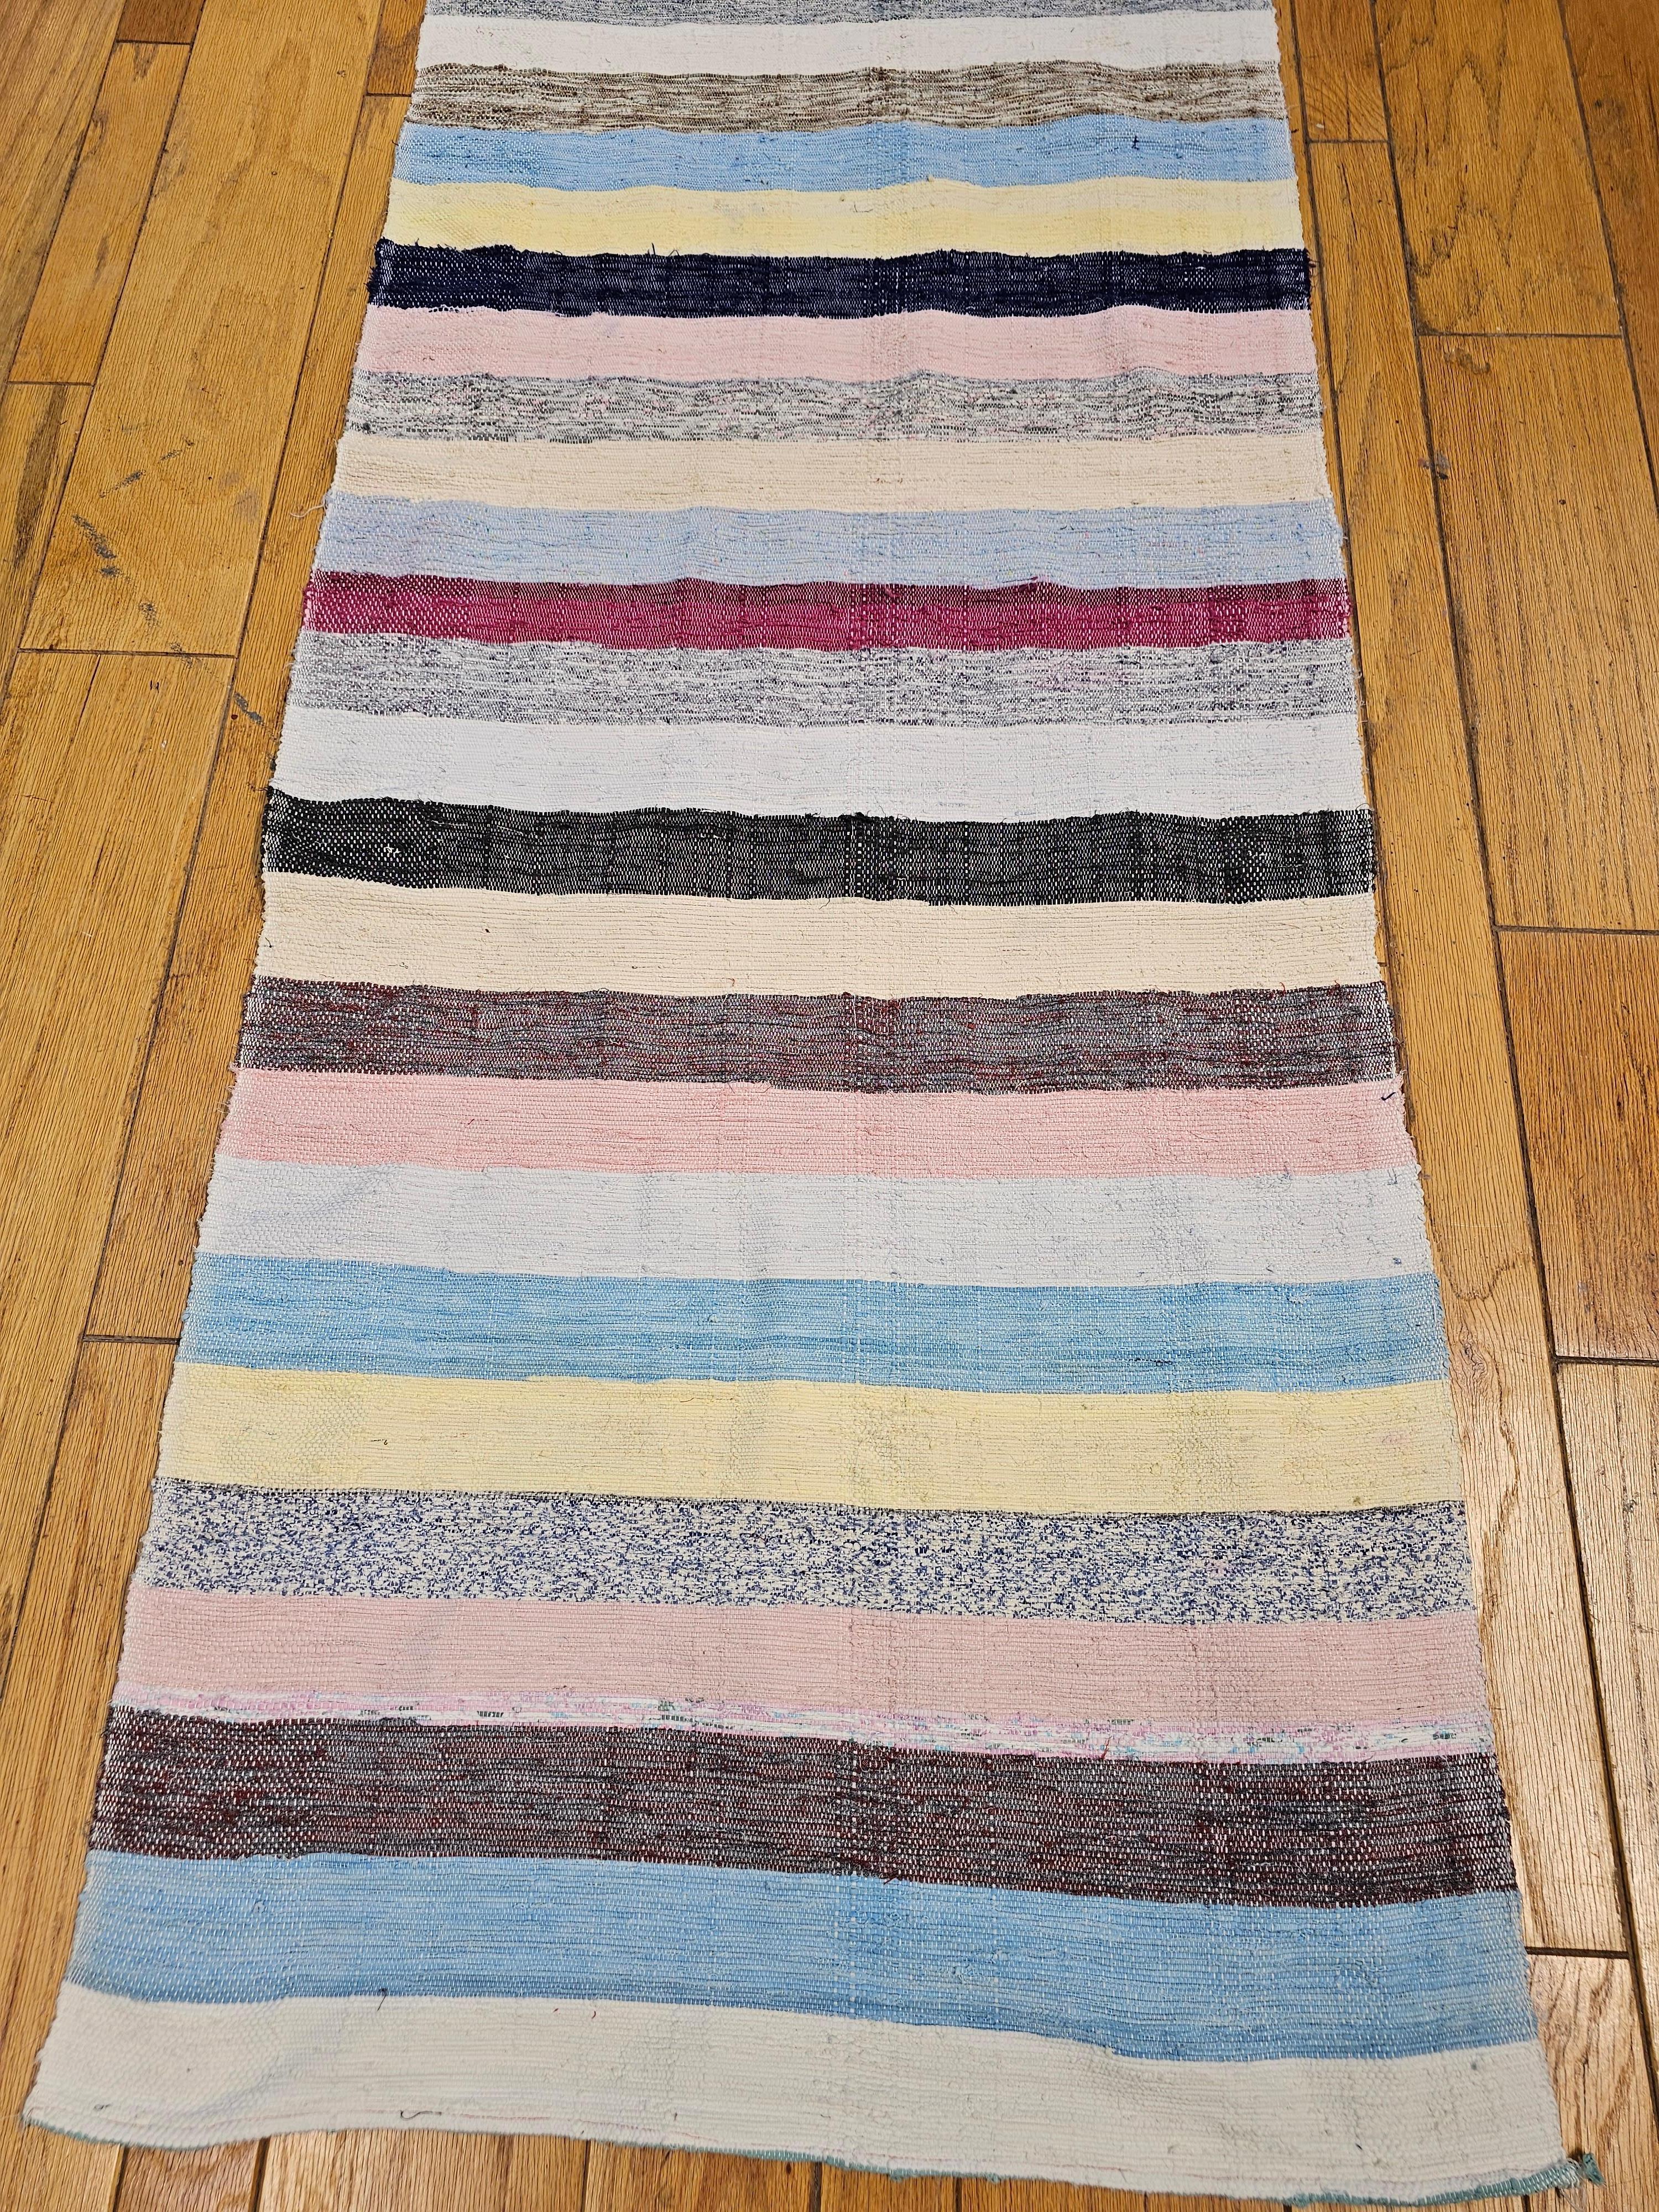 Vintage American Rag Area Rug has a very modern design format and can be incorporated into any modern interior design project.  The rug is formed of a series of bands in natural earth tones very similar to Scandinavian kilims from the late 1800s. 